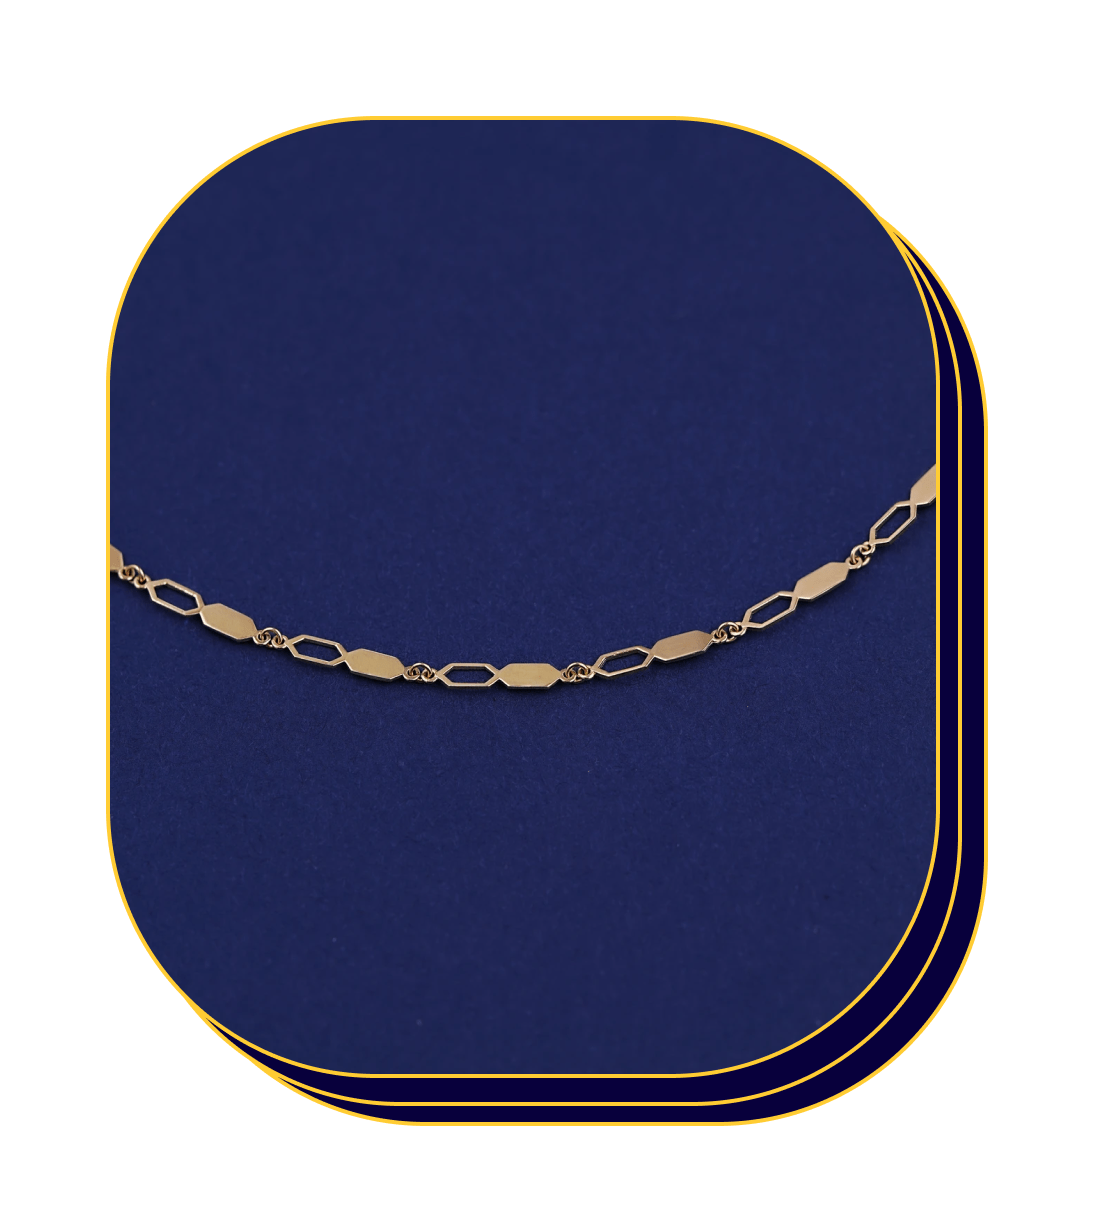 Close up view of a solid 14k yellow gold Tanlah Chain on a blue background